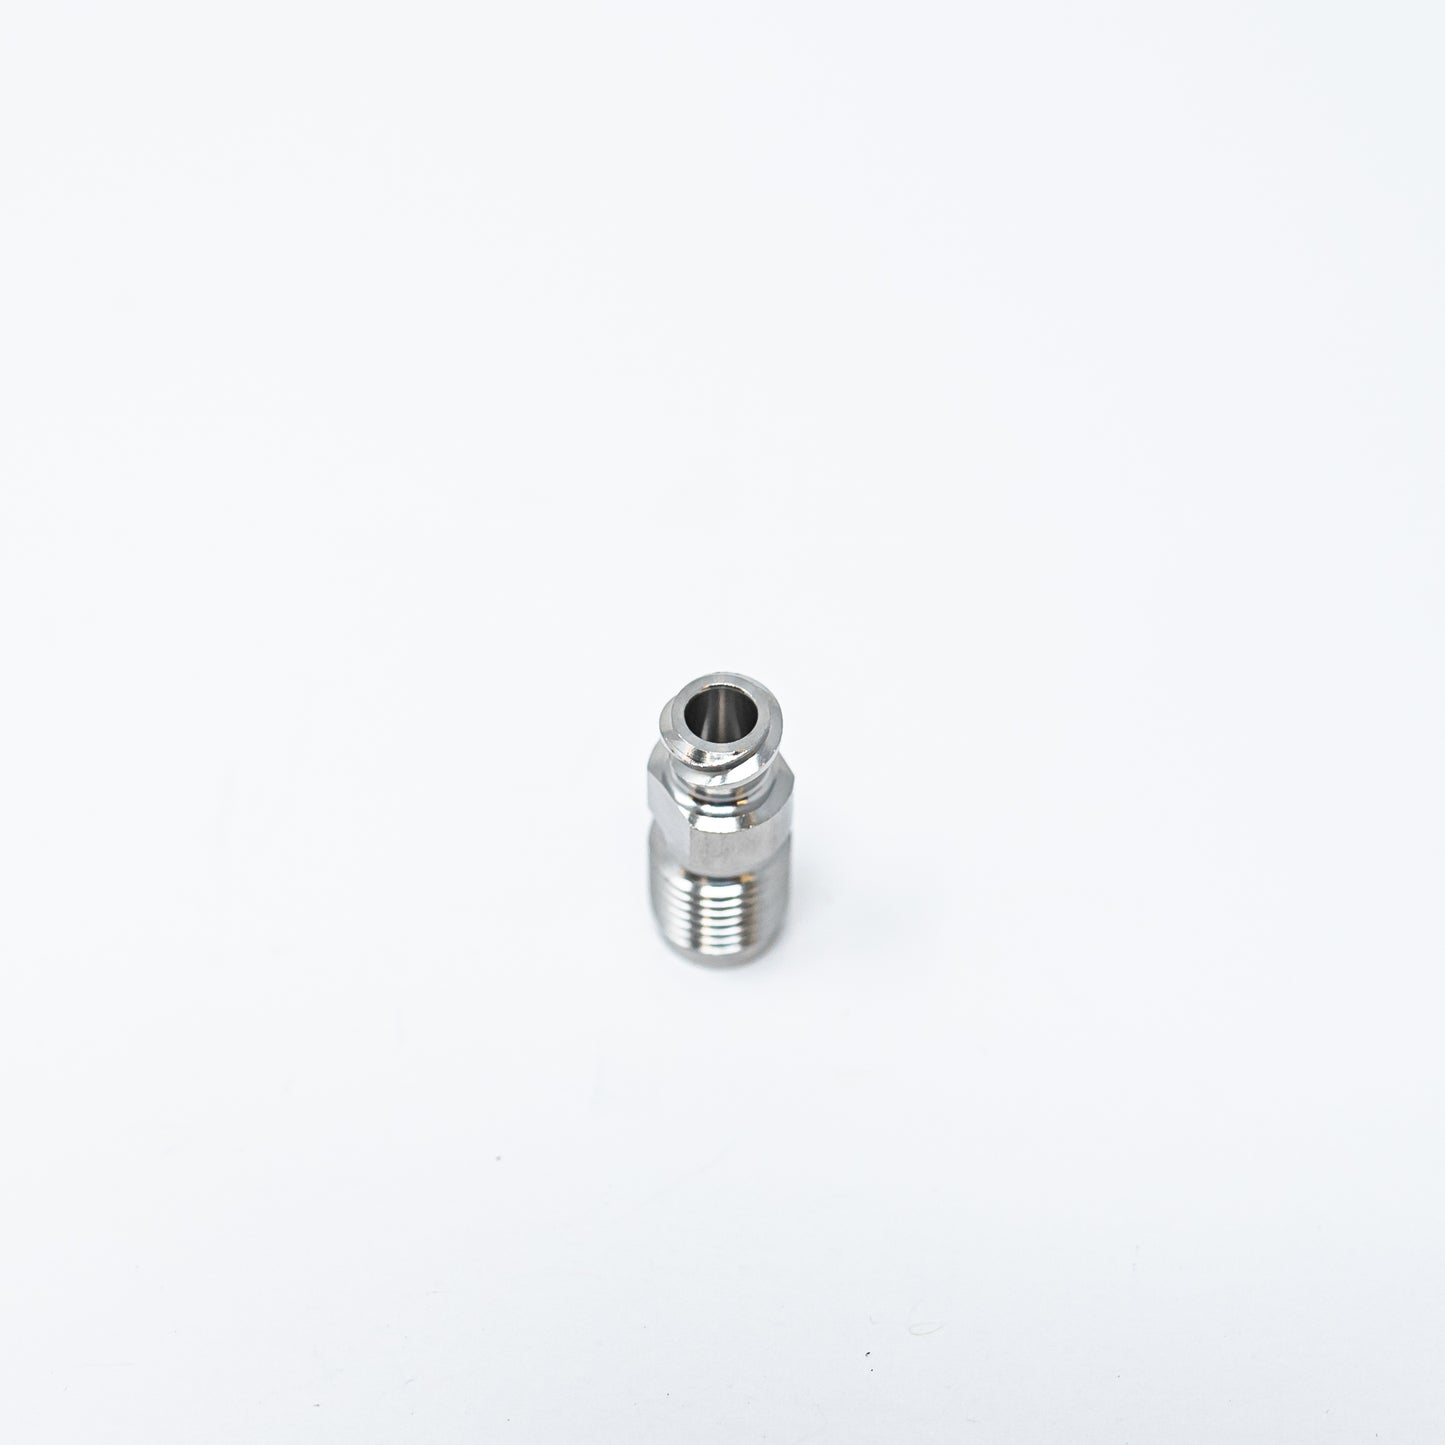 Stainless steel female Luer fitting